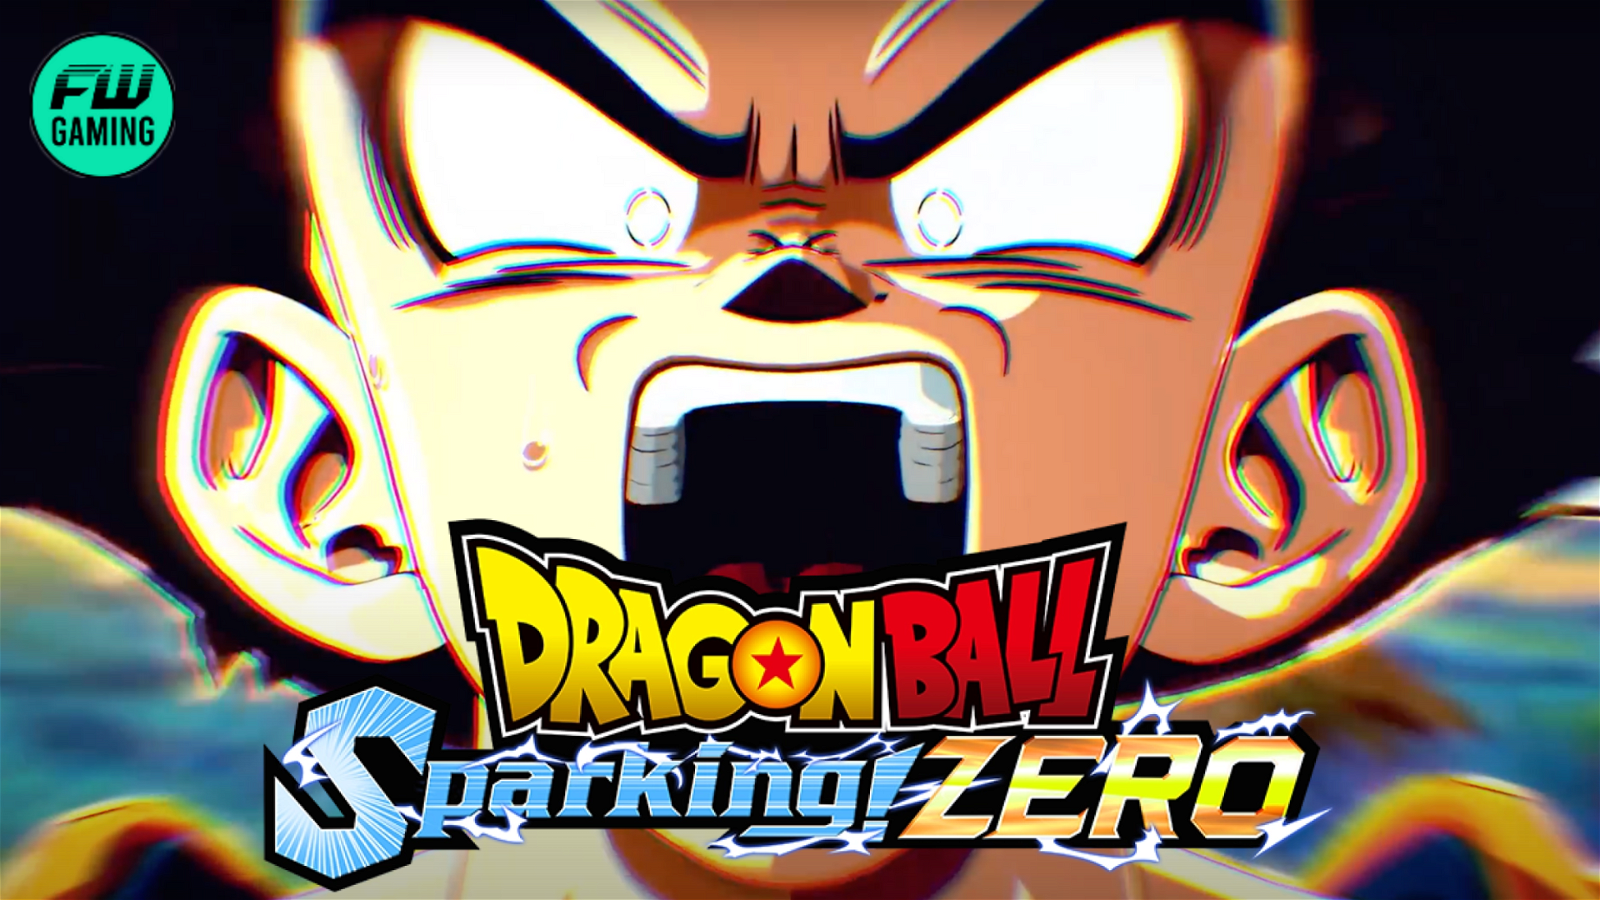 Dragon Ball: Sparking Zero Gets a Petition to Include One ‘Must Have’ Feature, Does It Have a Point?